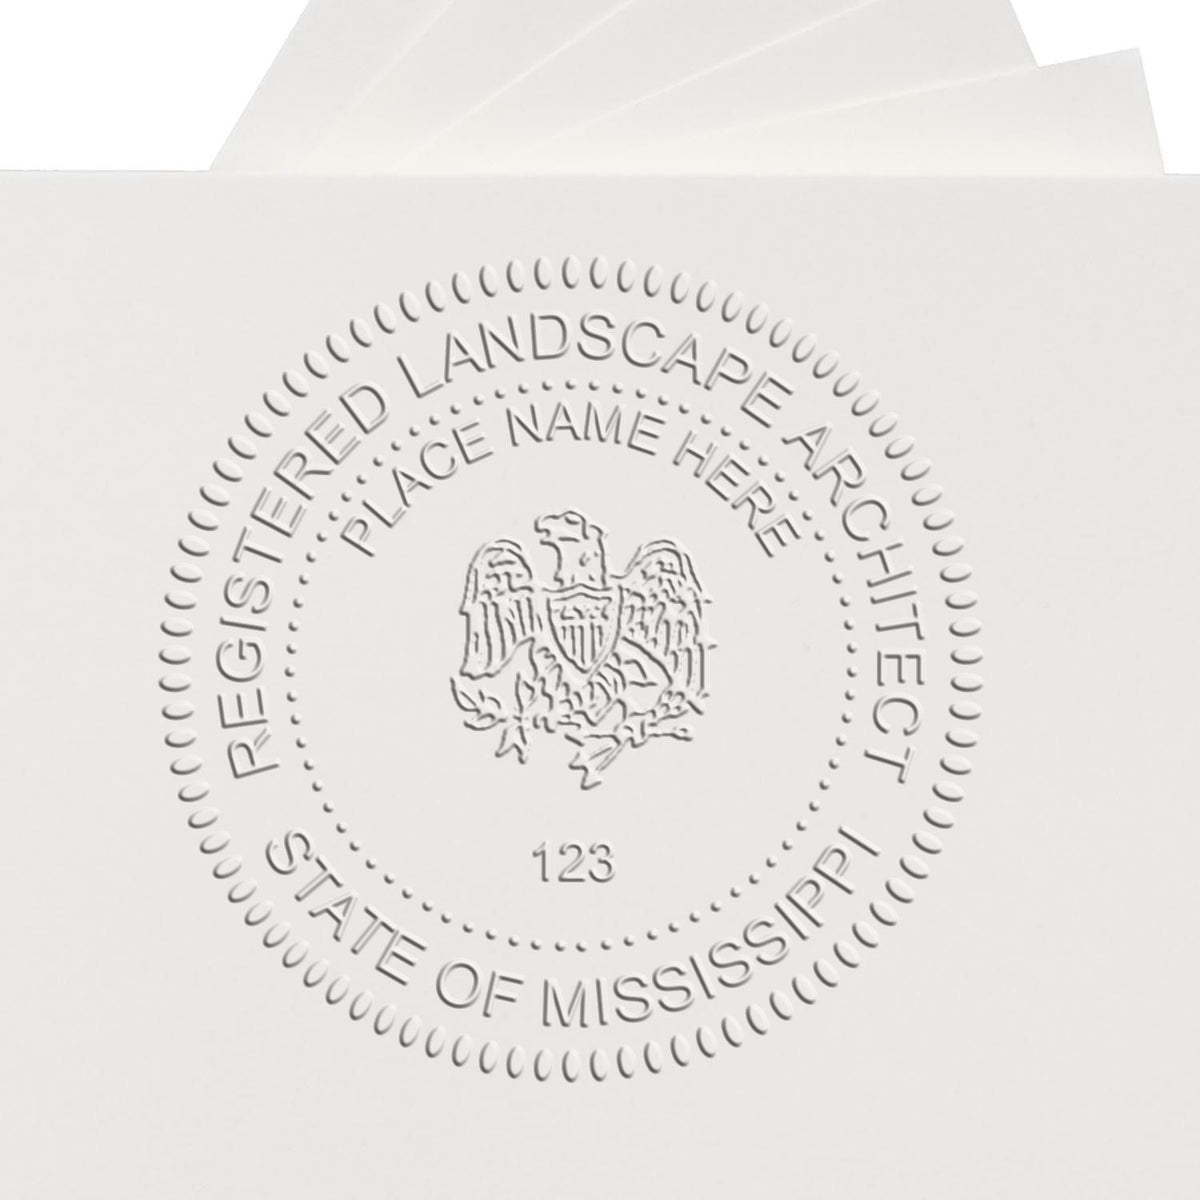 The Gift Mississippi Landscape Architect Seal stamp impression comes to life with a crisp, detailed image stamped on paper - showcasing true professional quality.